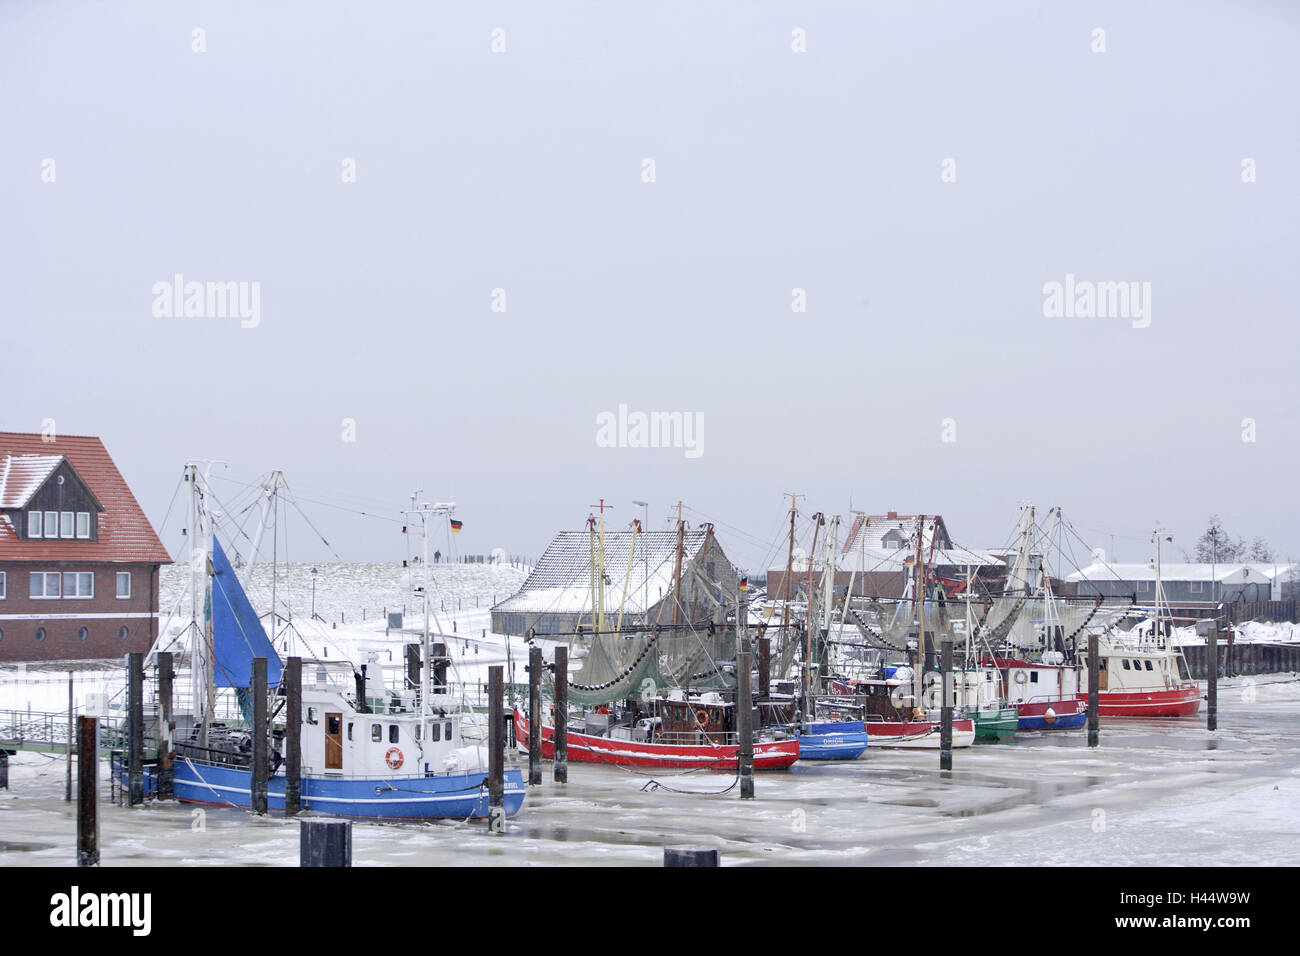 Germany, Lower Saxony, Butjadingen, fishing harbour, winter, fishing houses, houses, residential houses, harbour, landing stage, fishing boats, boots, fishing trawlers, season, cold, snow, ice cream, dyke, coast, iceboundly, bay, crab cutter, angling, North Germany, fishing port, Stock Photo